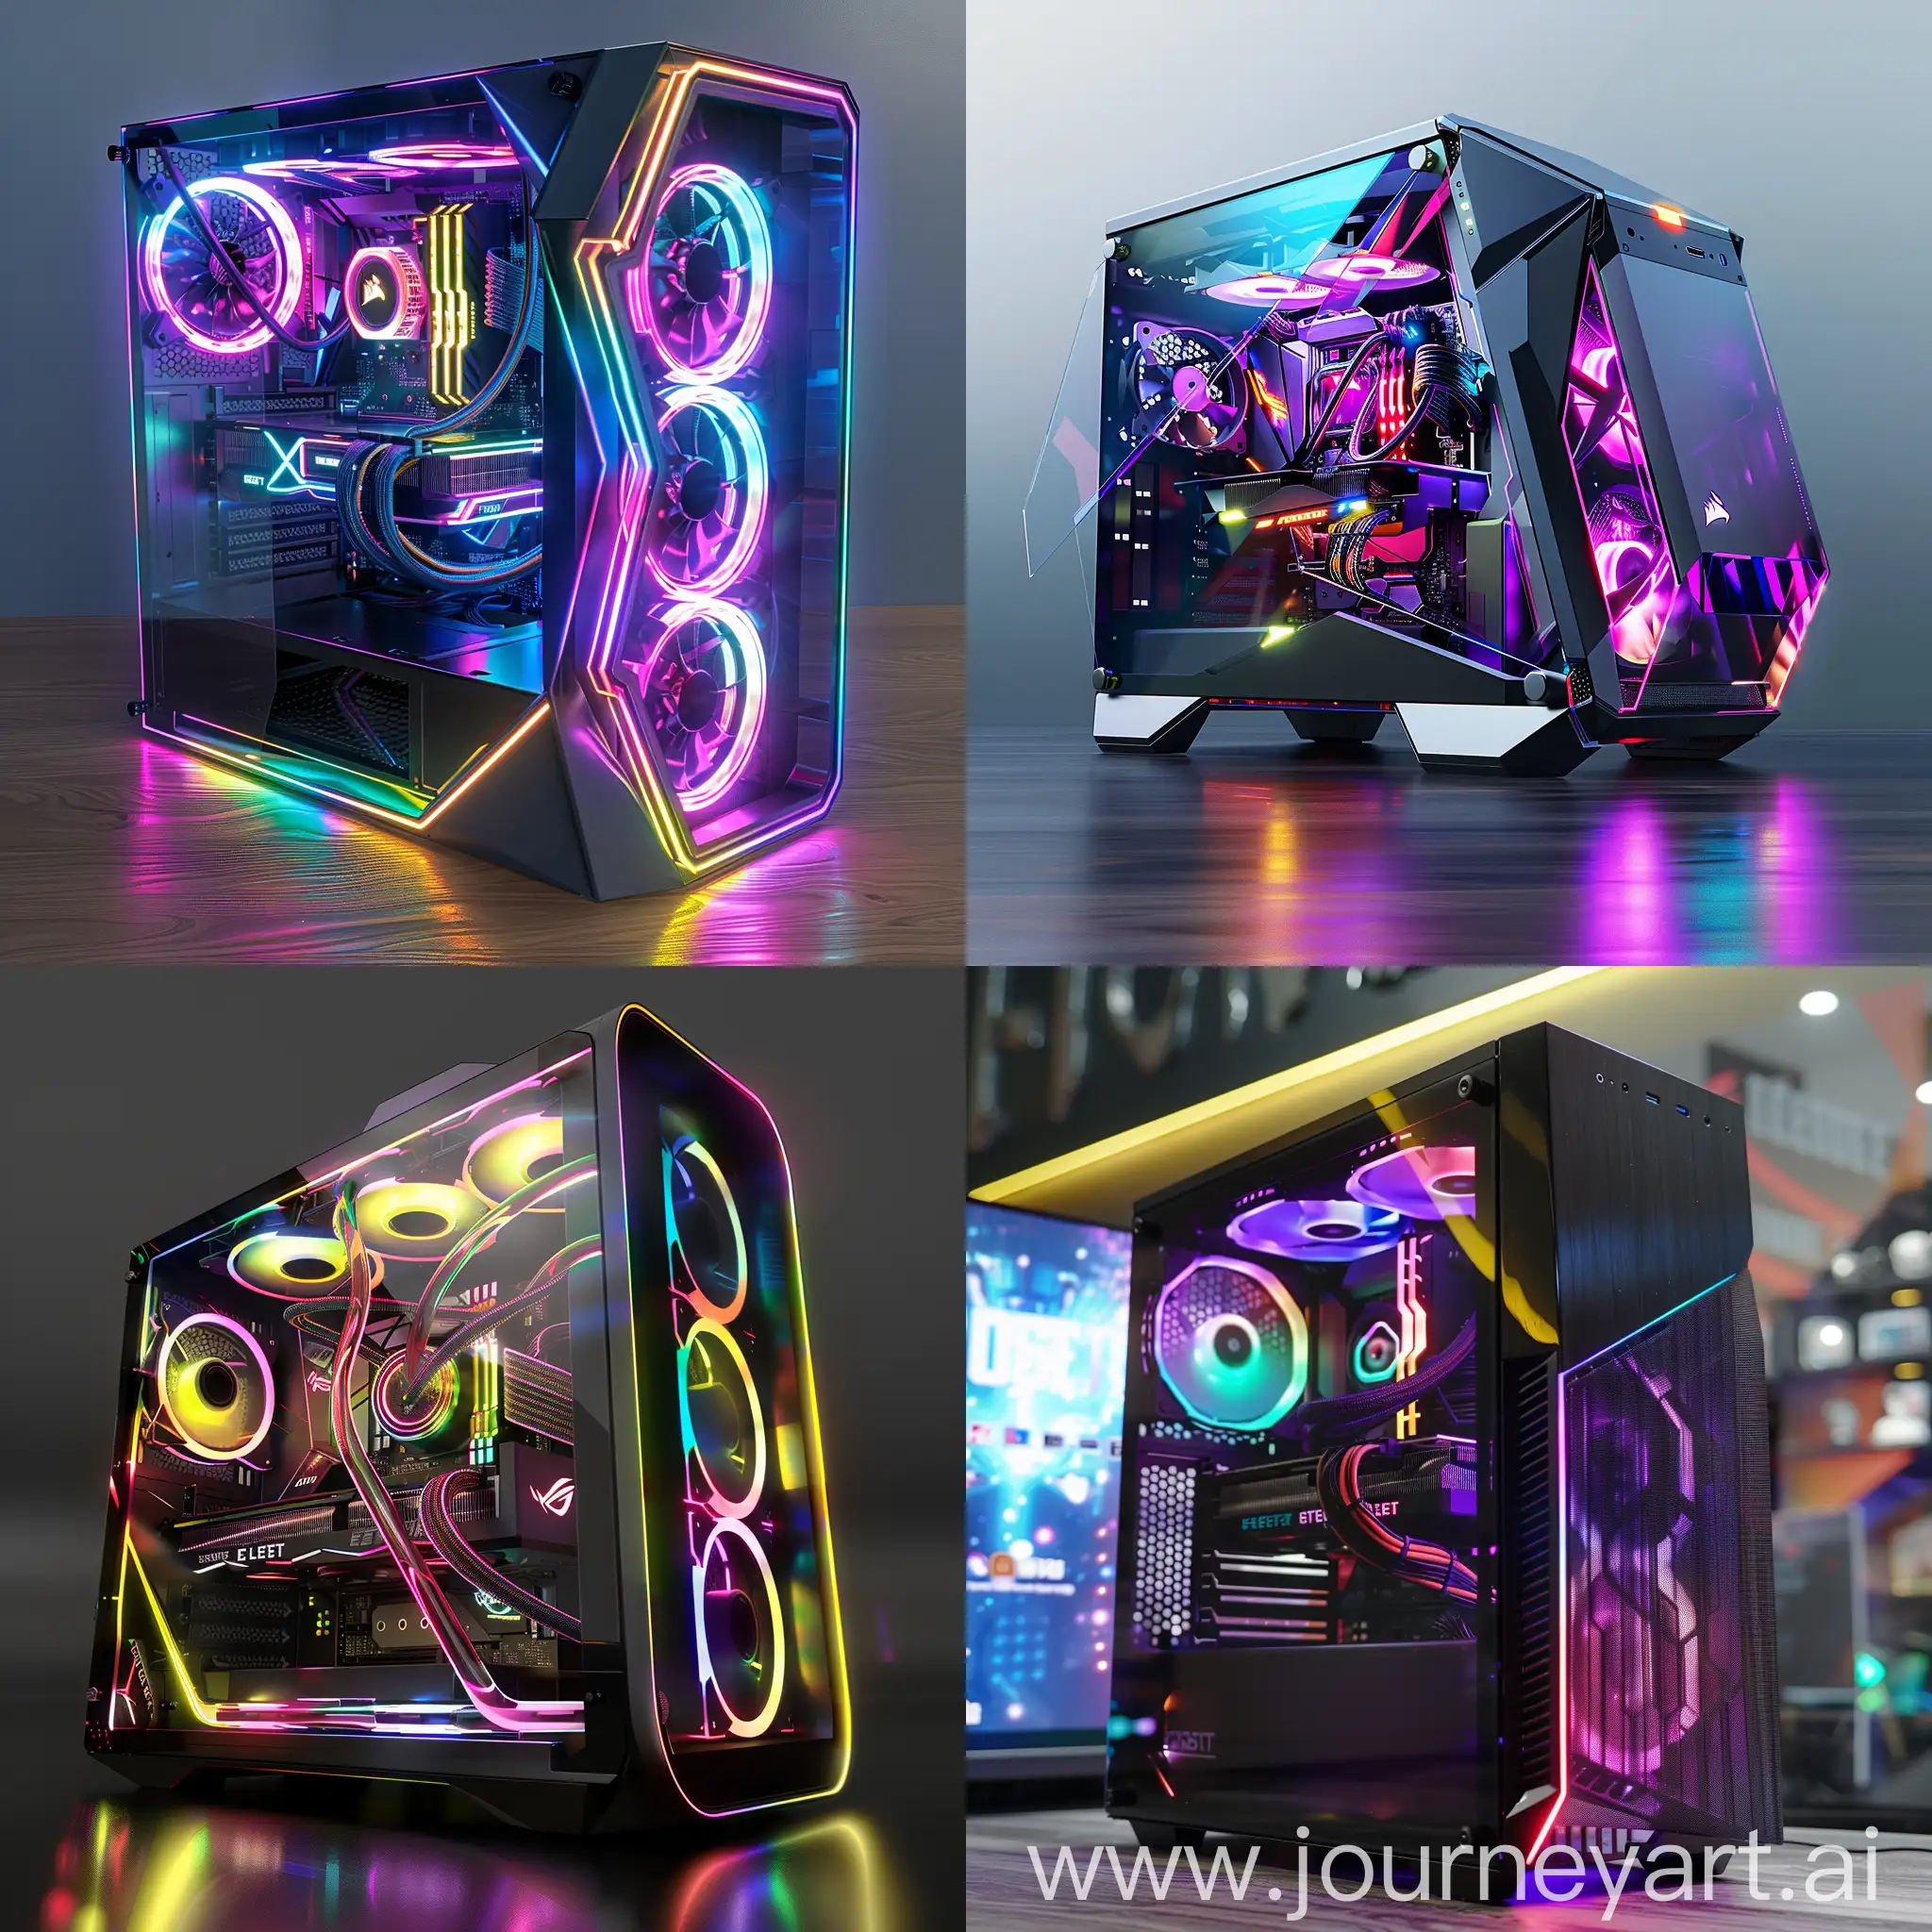 Futuristic-PC-Case-with-Advanced-Cooling-and-RGB-Lighting-Hightech-Design